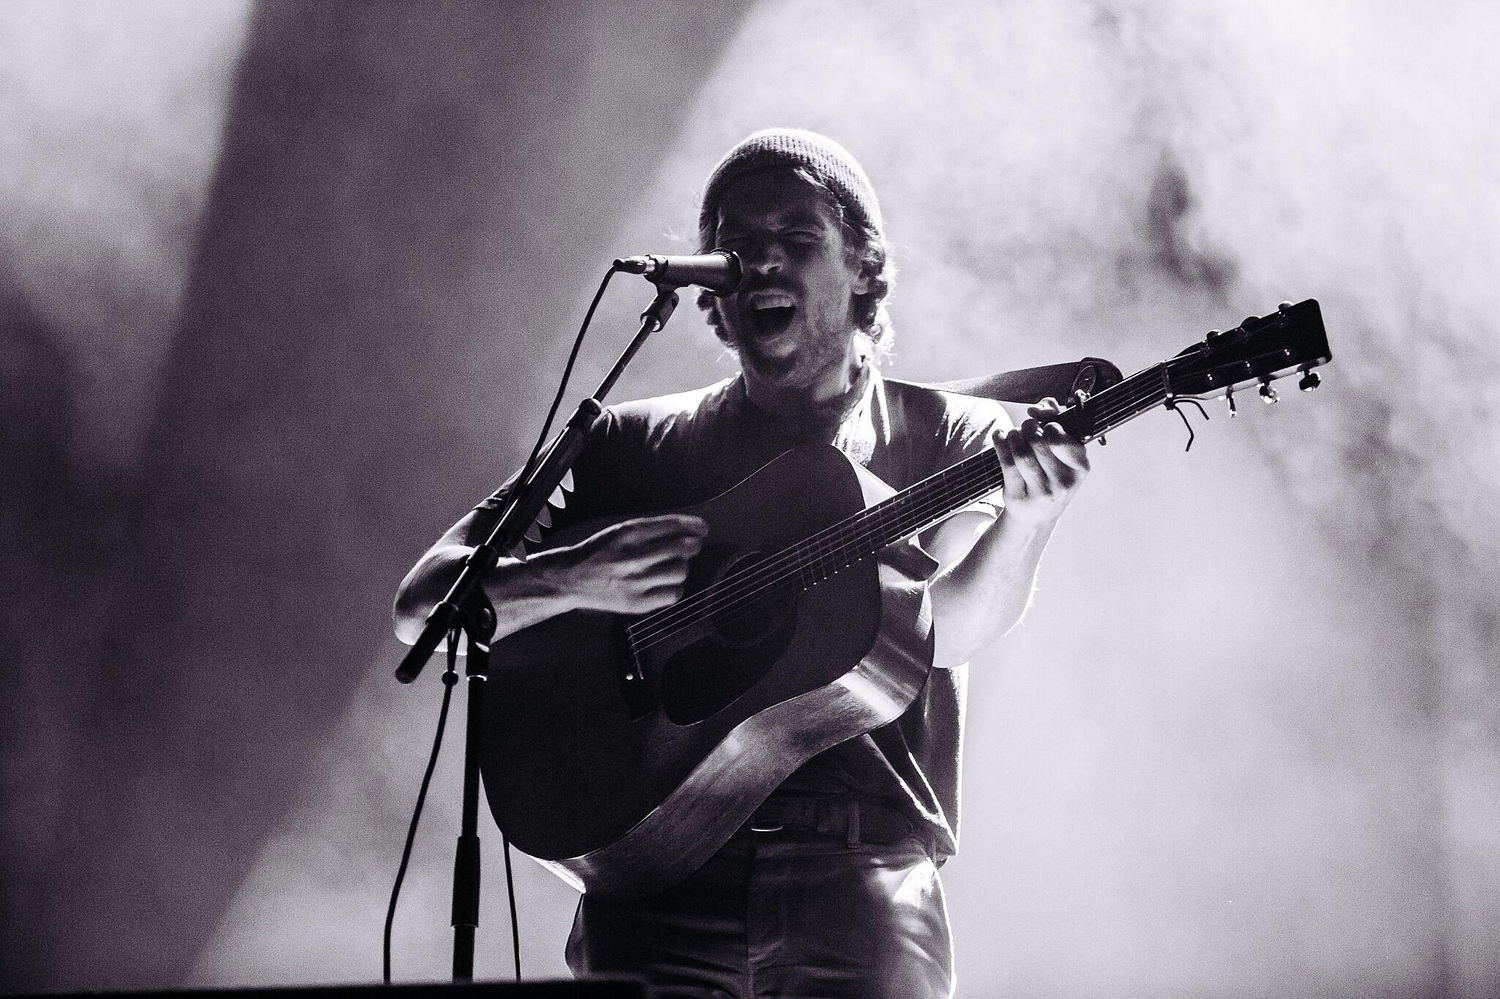 Fleet Foxes are spellbinding as they return to UK soil to close Latitude 2017